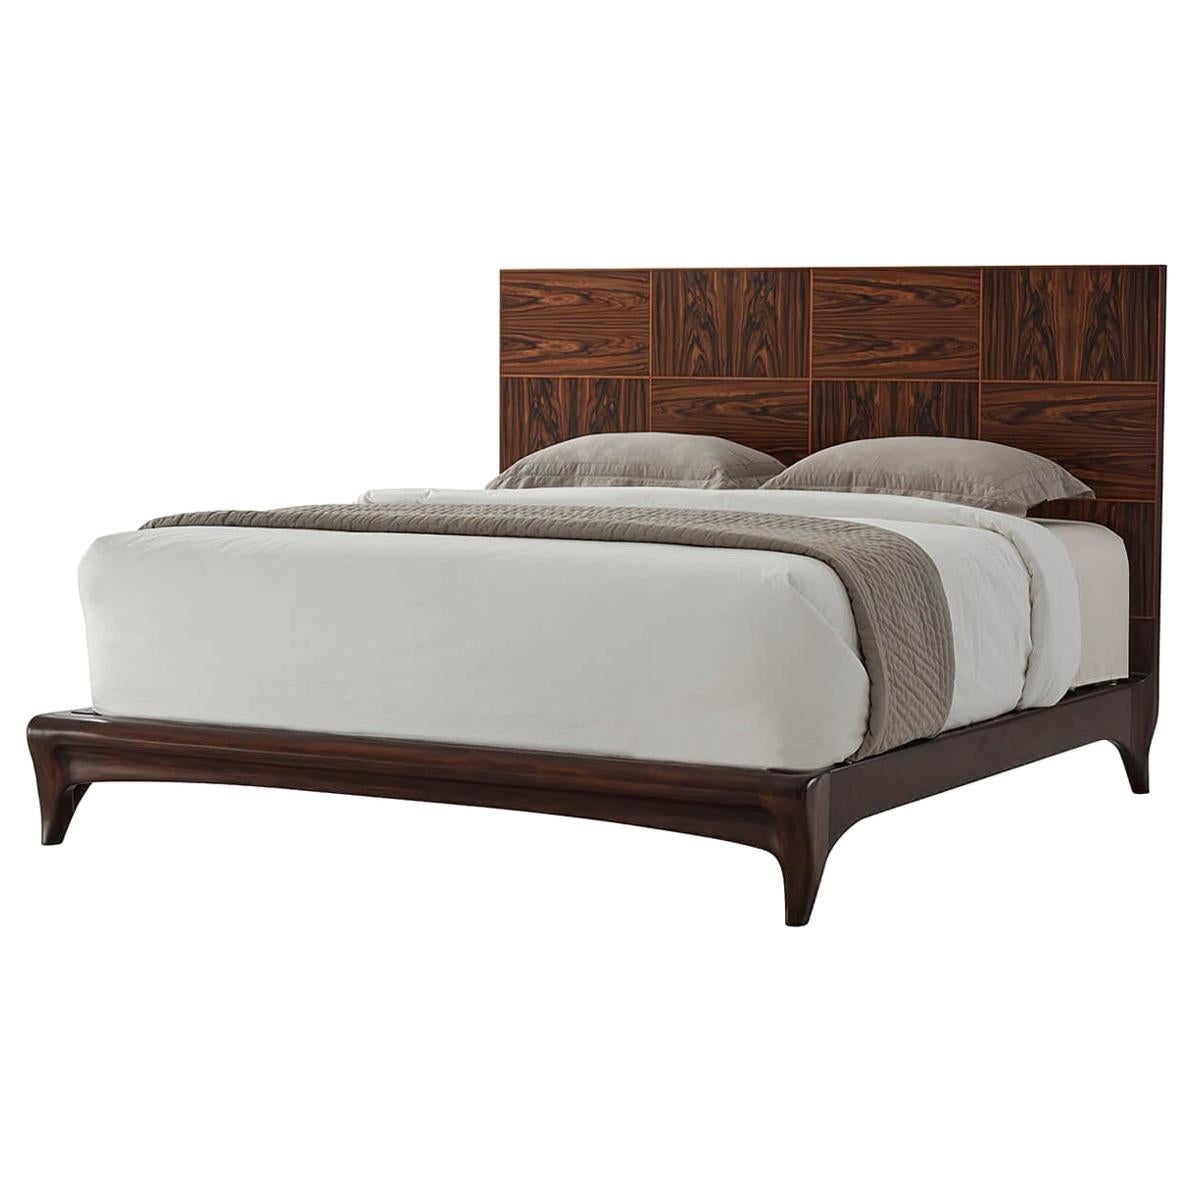 Mid-Century Modern Bed For Sale